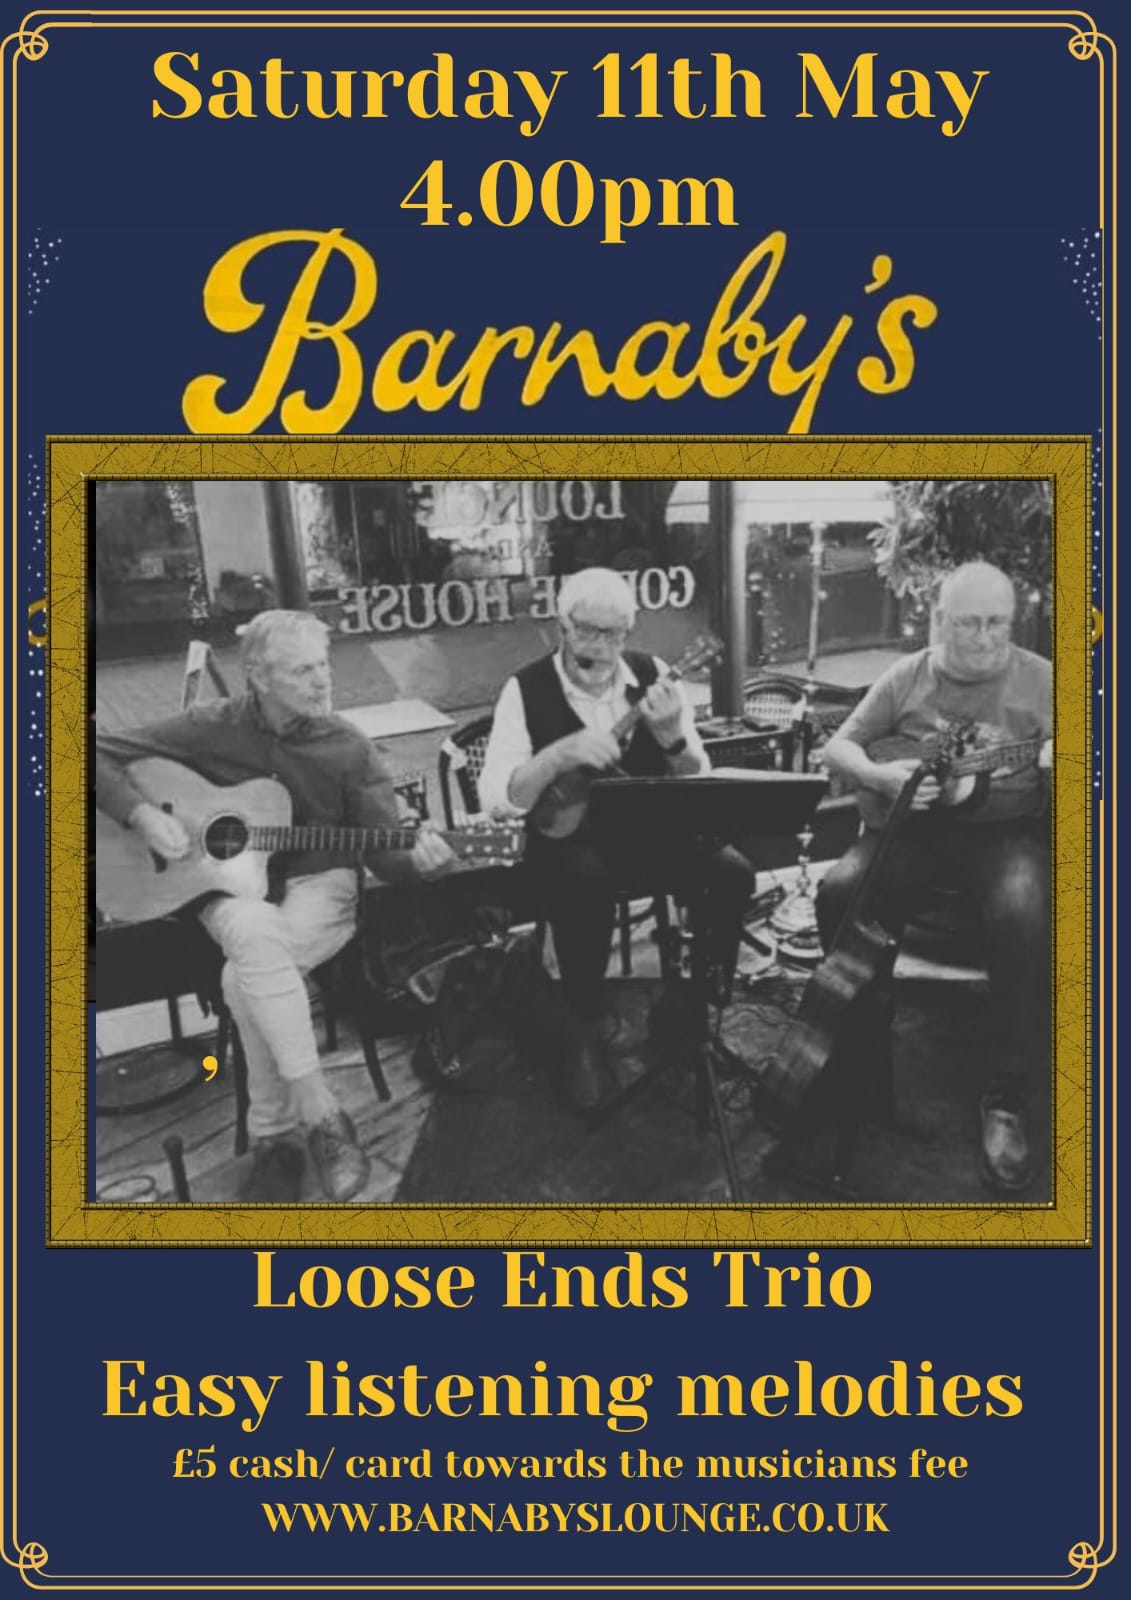 Live music easy listening with Loose Ends Trio